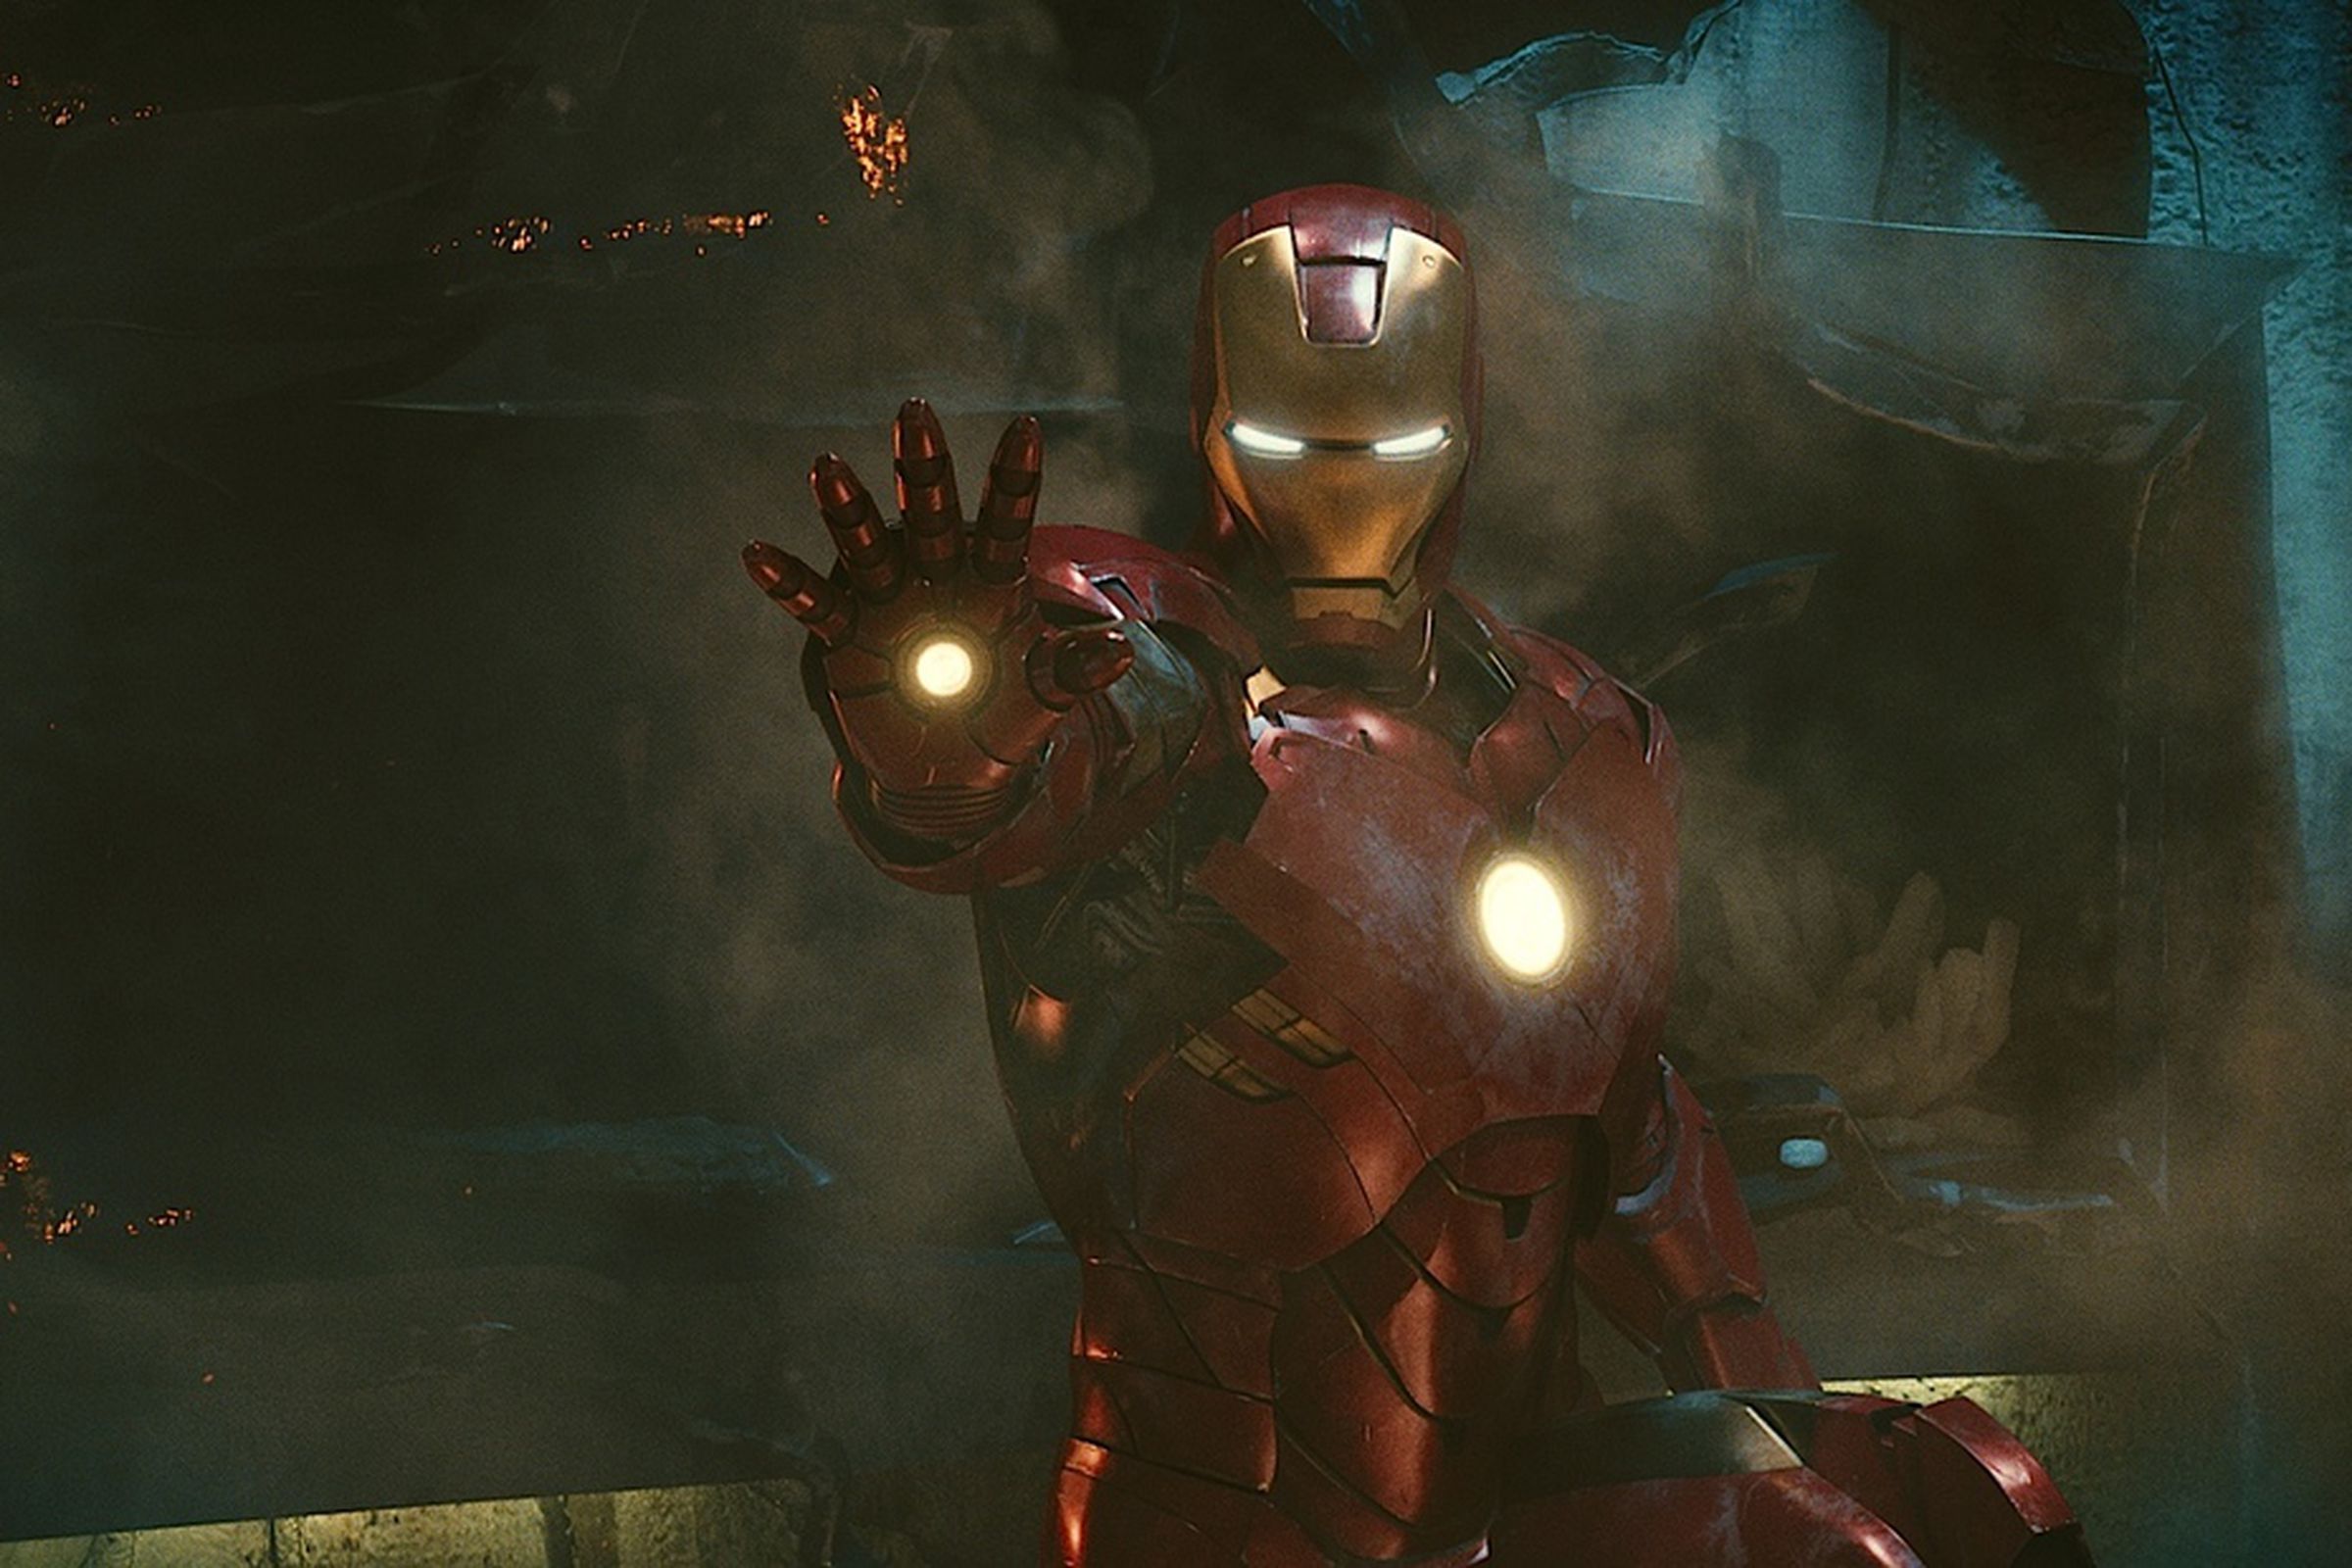 Iron Man Suit (source: Paramount Pictures)